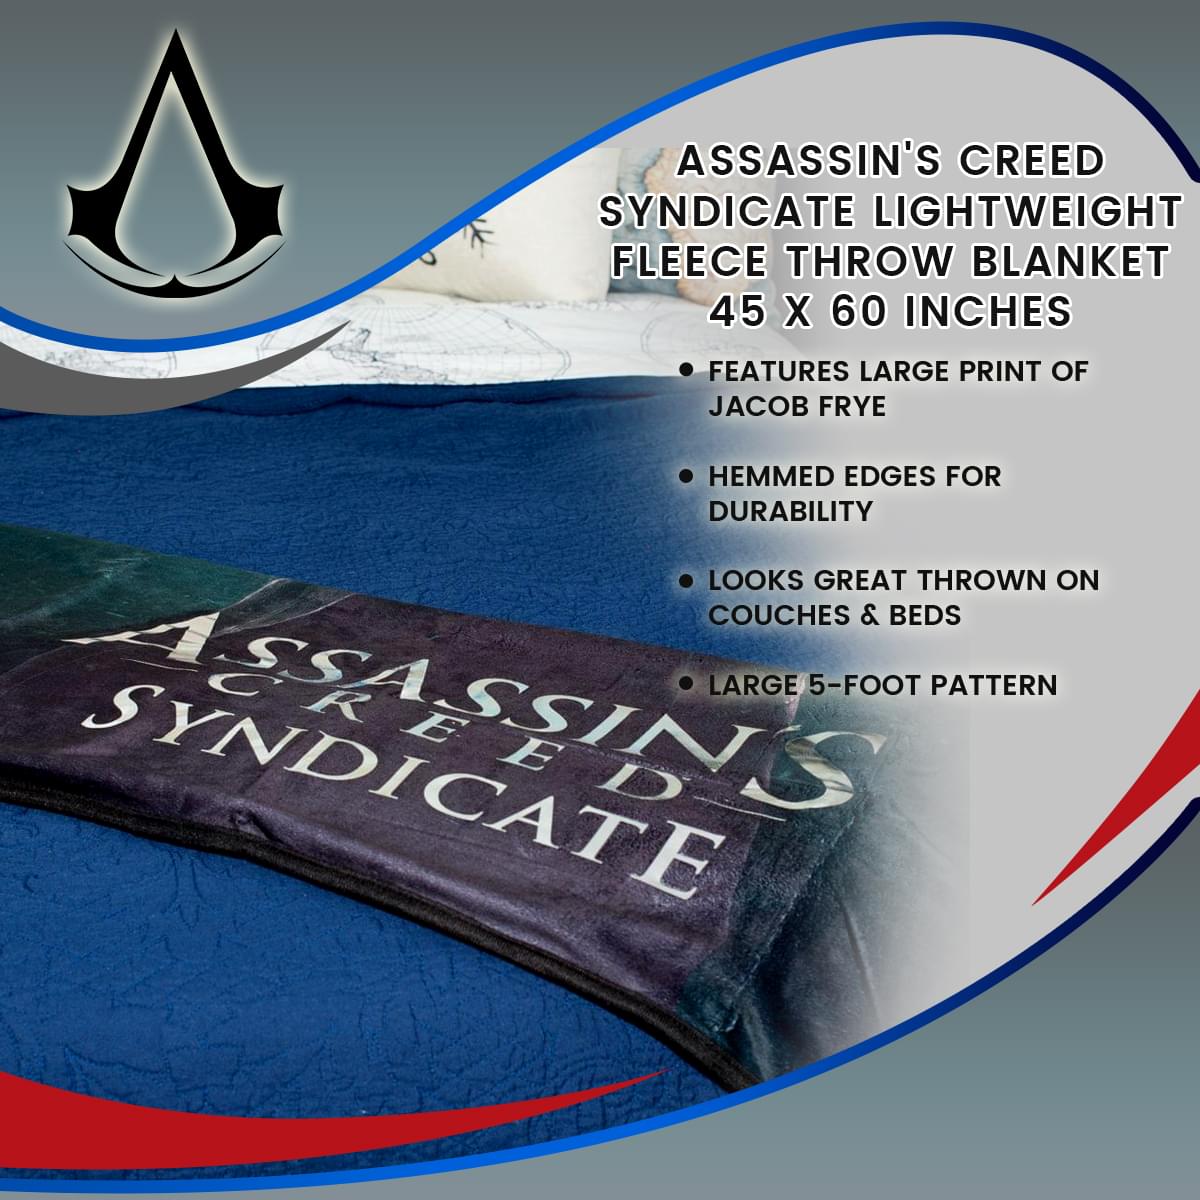 Assassin's Creed Syndicate Lightweight Fleece Throw Blanket | 45 x 60 Inches